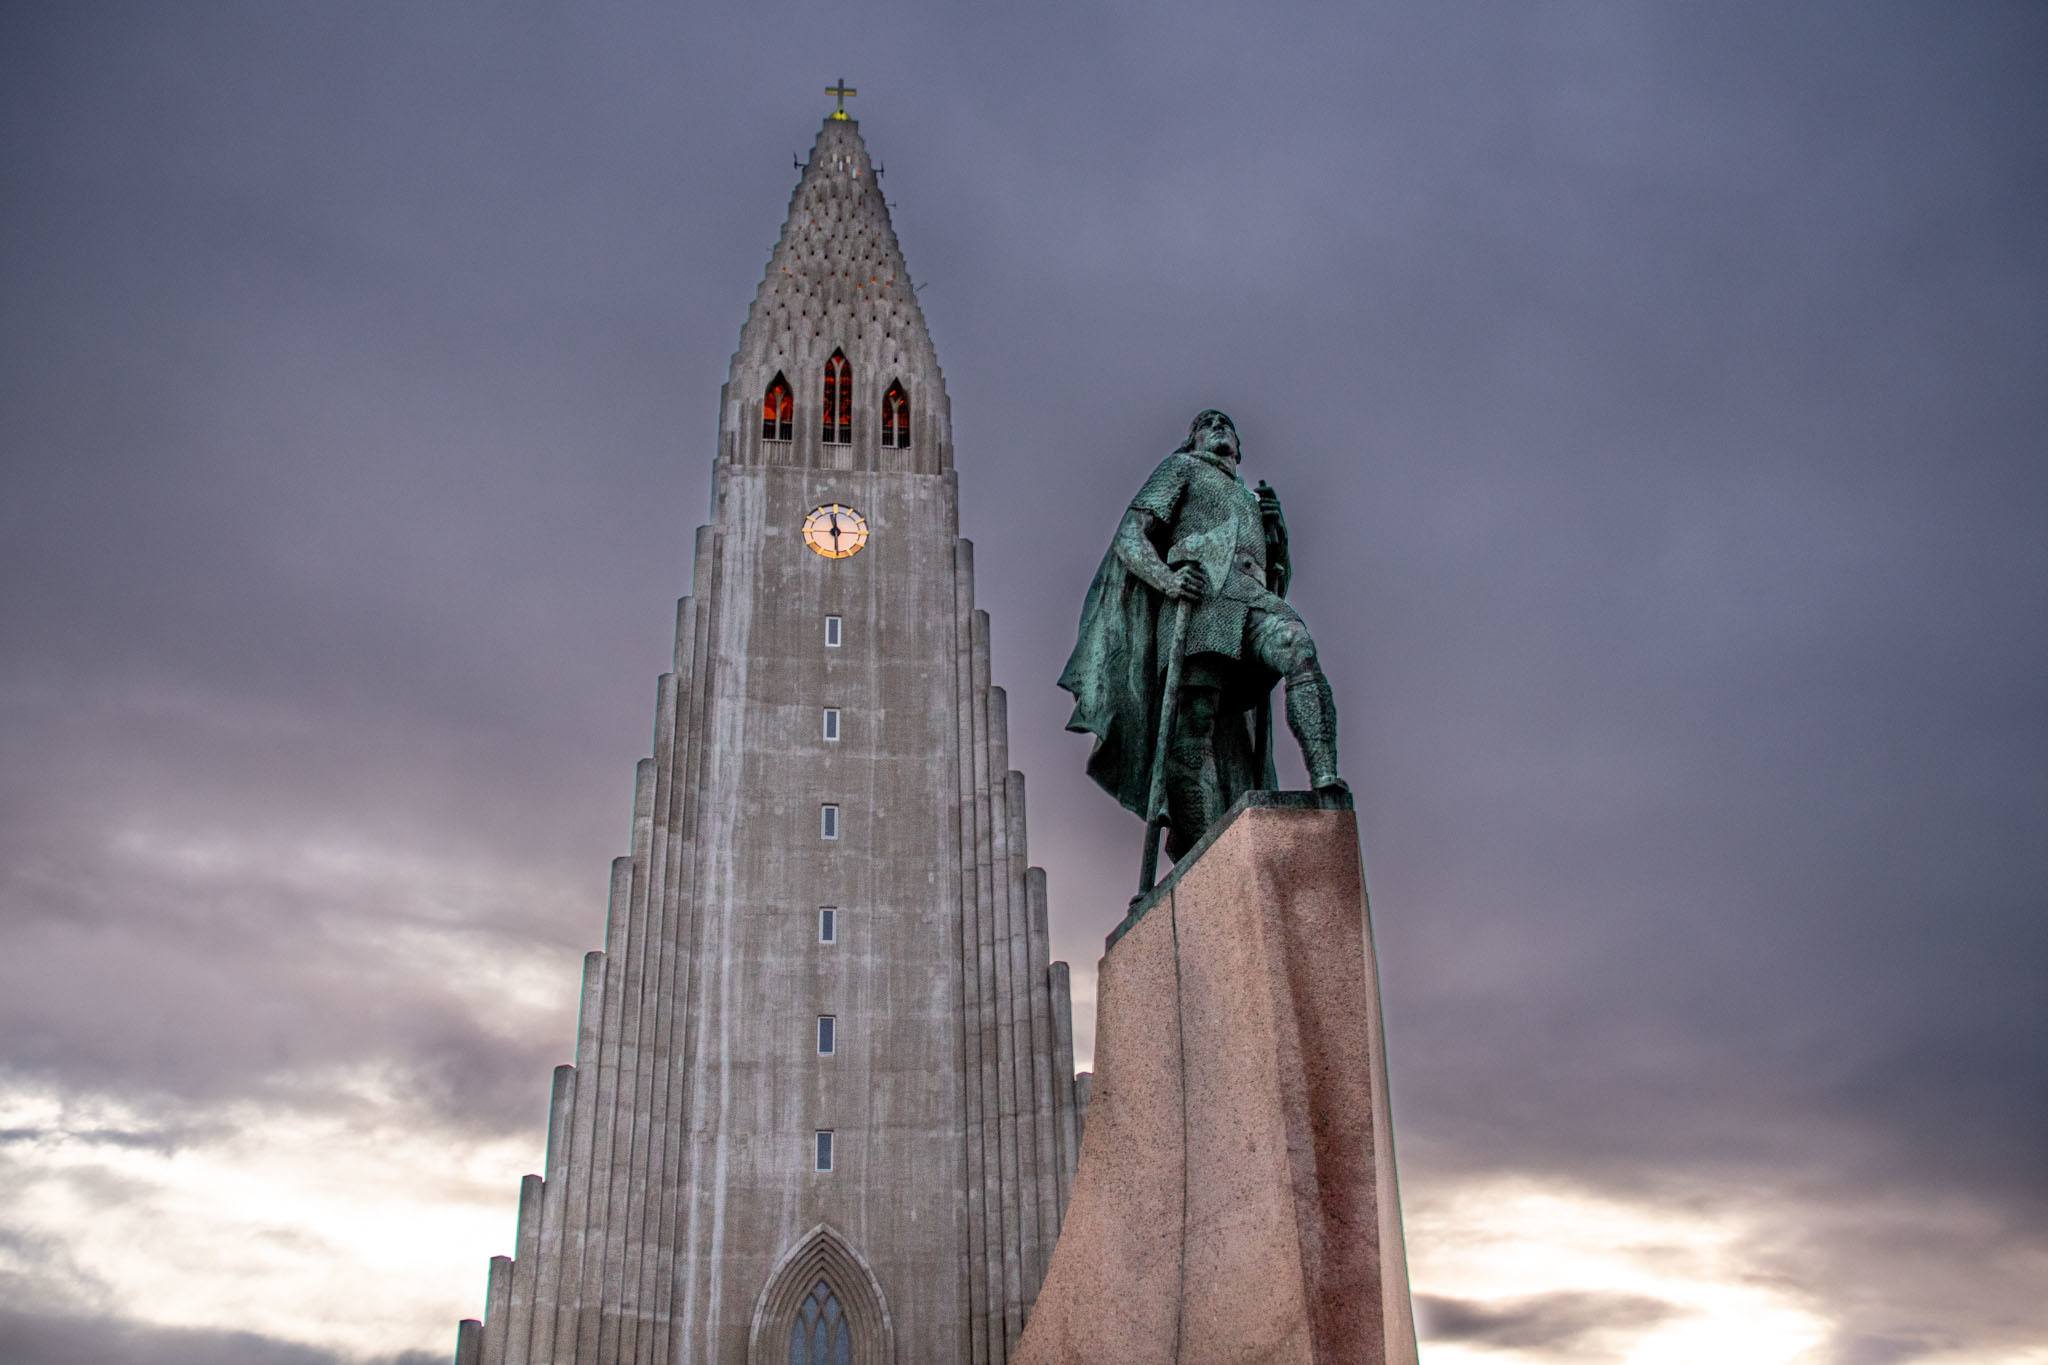 The Leif Ericsson statue in front of the Hallgrimskirkja church in Reykjavik. The Hallgrimskirkja is the defining feature of the downtown Reykjavik skyline.